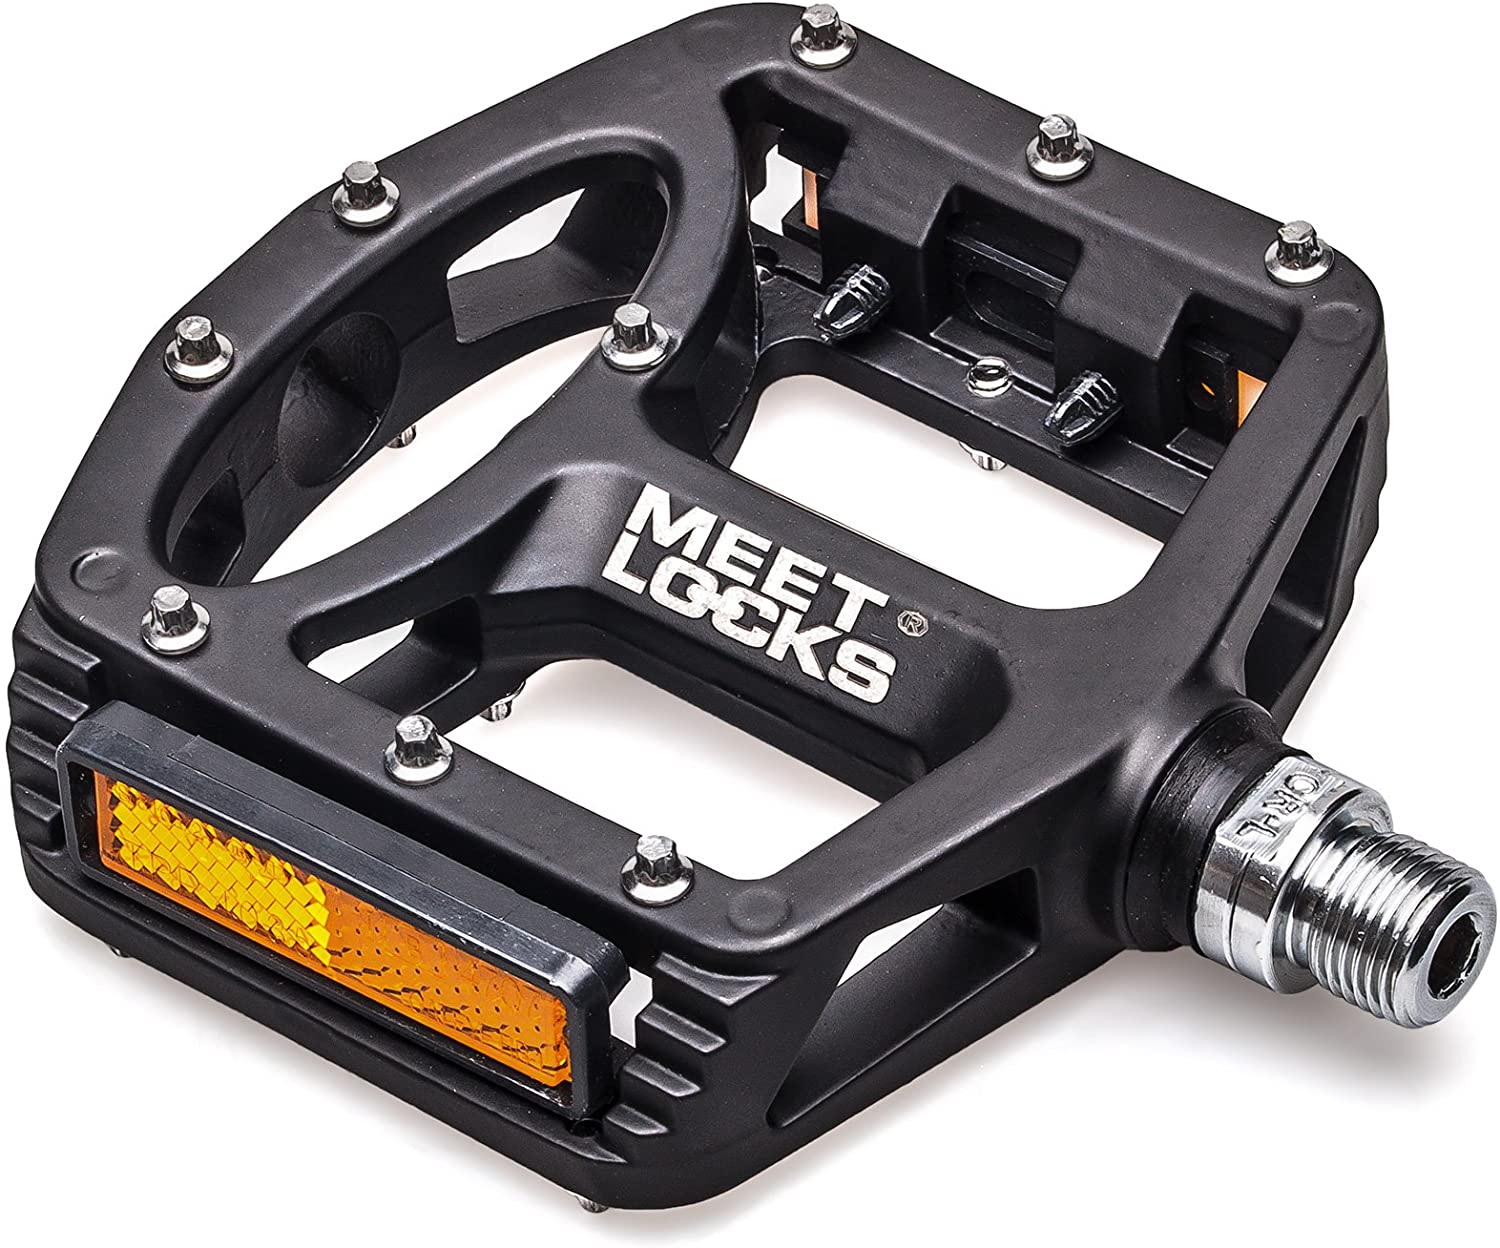 The MEETLOCKS Bike Pedal Injection Magnesium Alloy Body Cr-Mo Machined 9/16" Screw Thread Spindle Ultra DU/Sealed Bearings